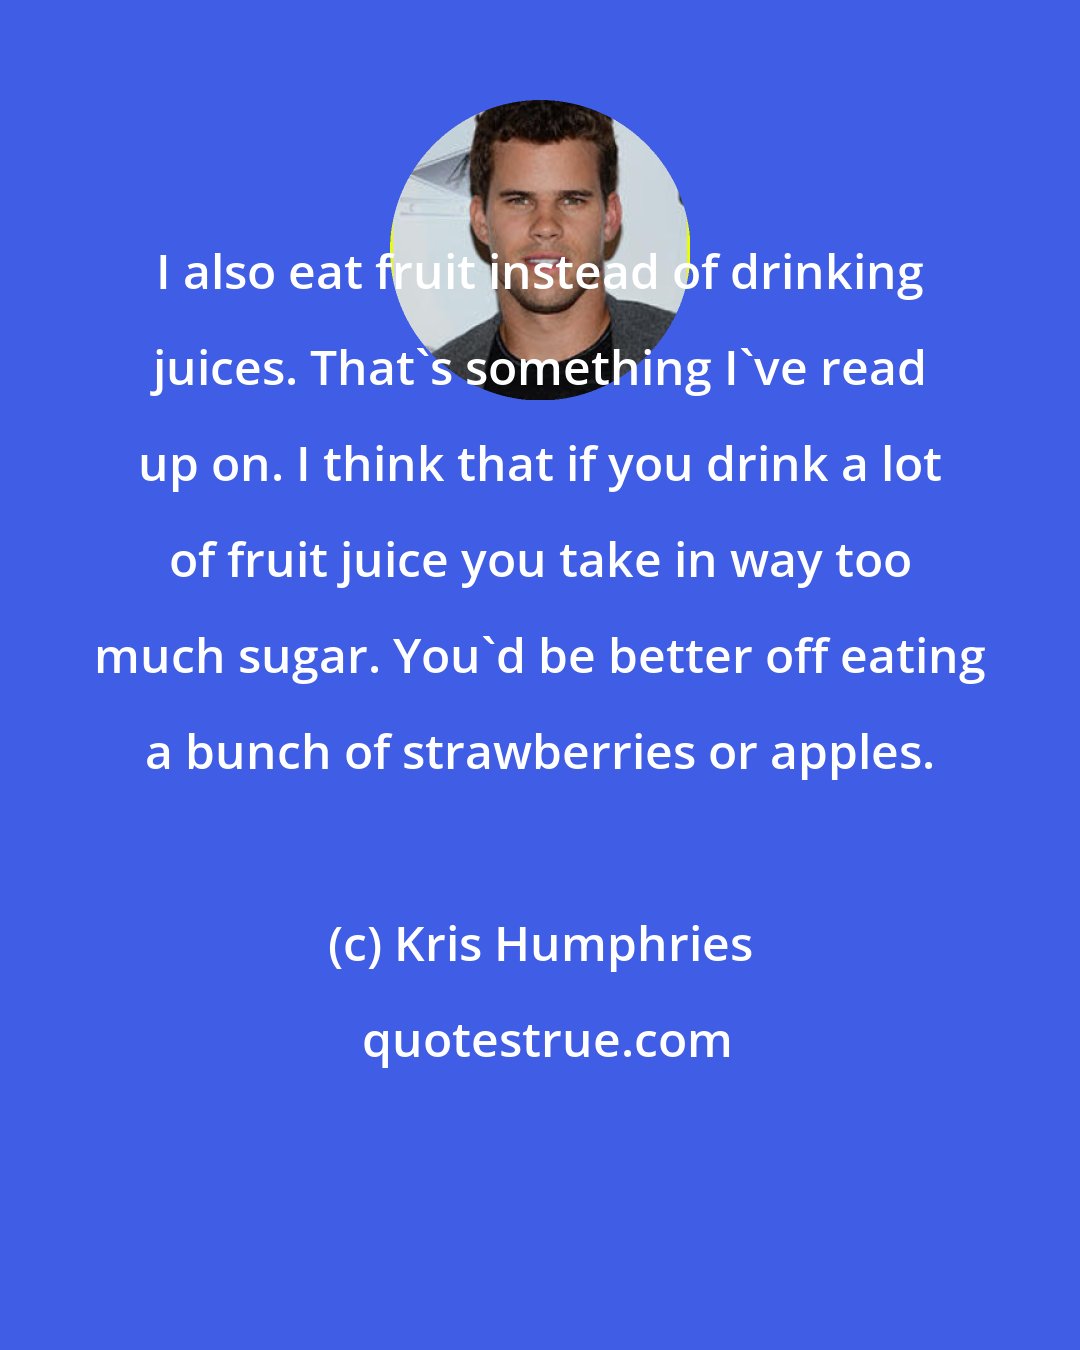 Kris Humphries: I also eat fruit instead of drinking juices. That's something I've read up on. I think that if you drink a lot of fruit juice you take in way too much sugar. You'd be better off eating a bunch of strawberries or apples.